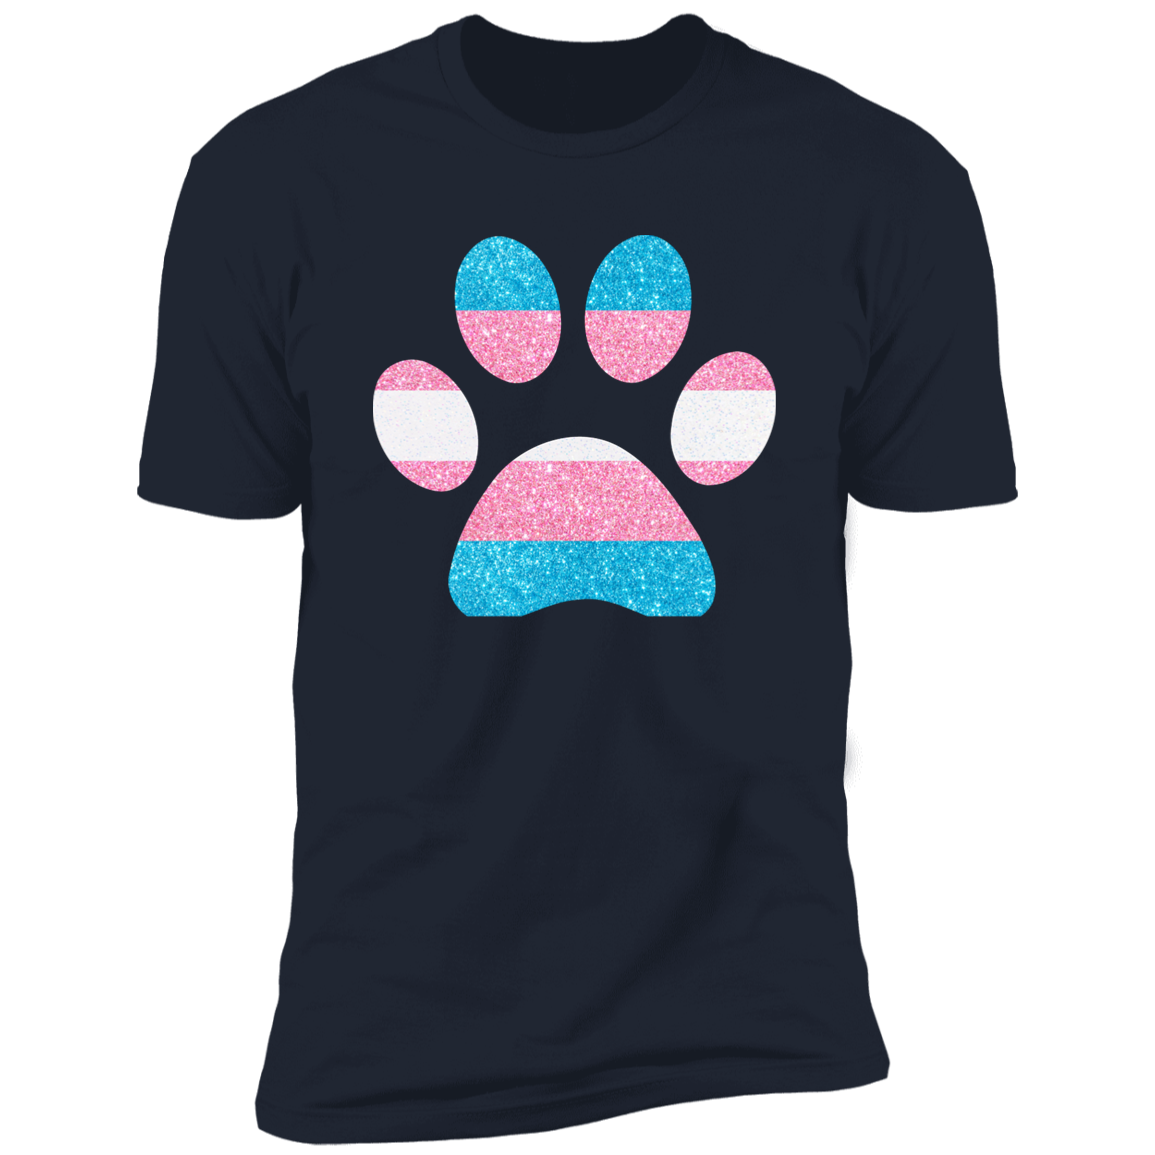 Dog Paw Trans Pride t-shirt, dog trans pride dog shirt for humans, in navy blue